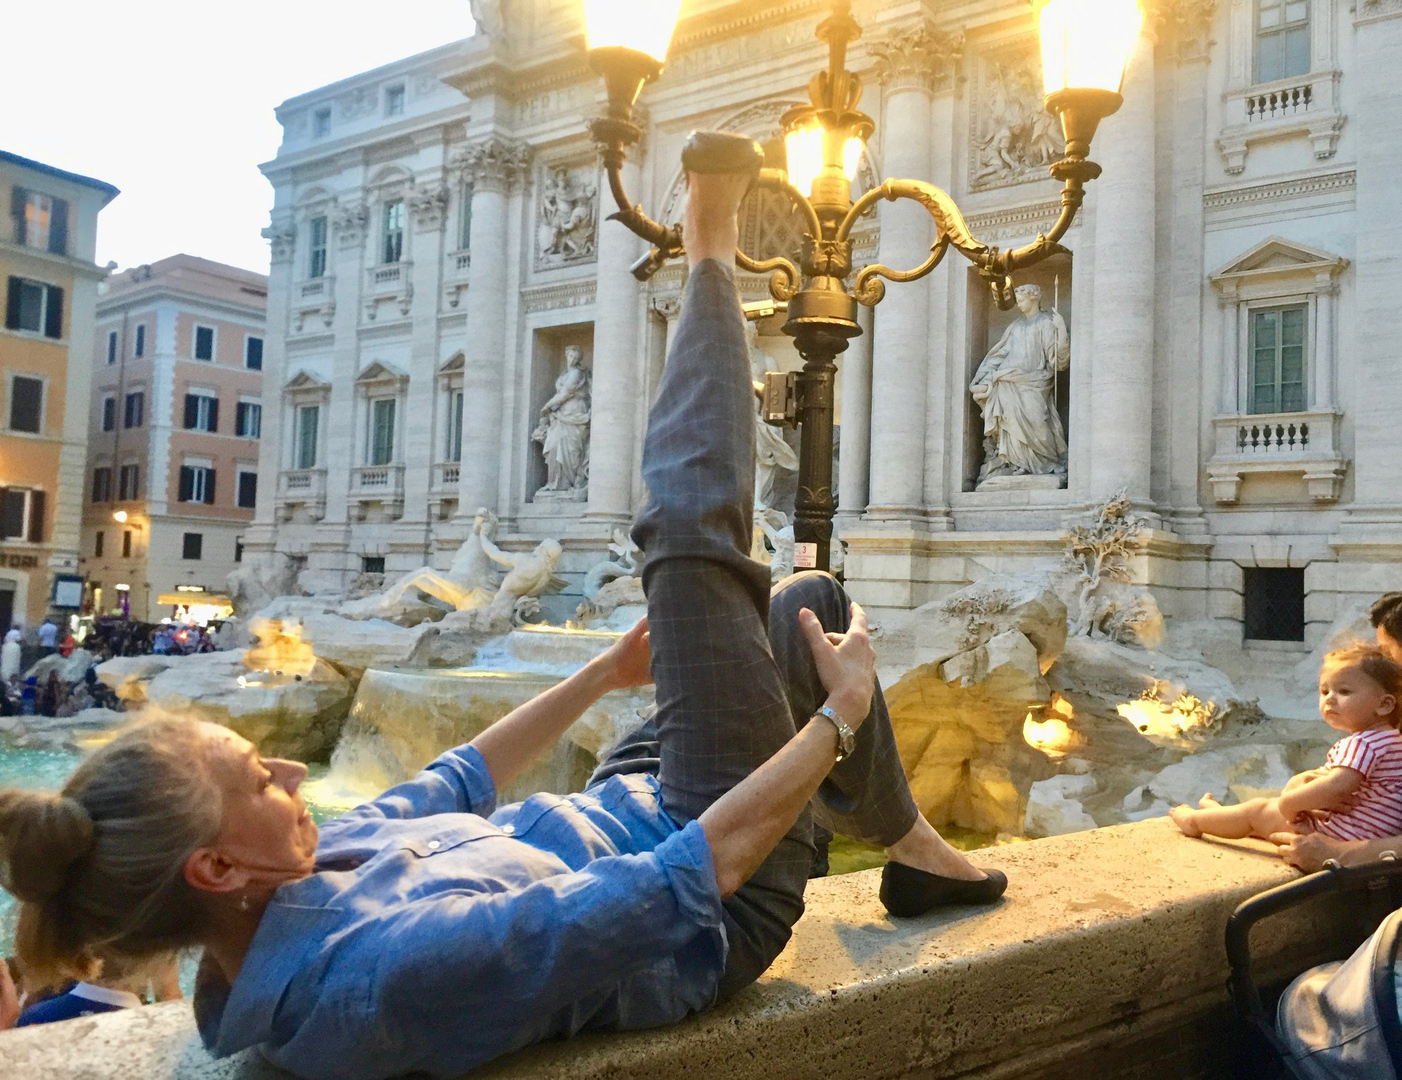 a woman doing the floor-barre exercise near the trevi fountain